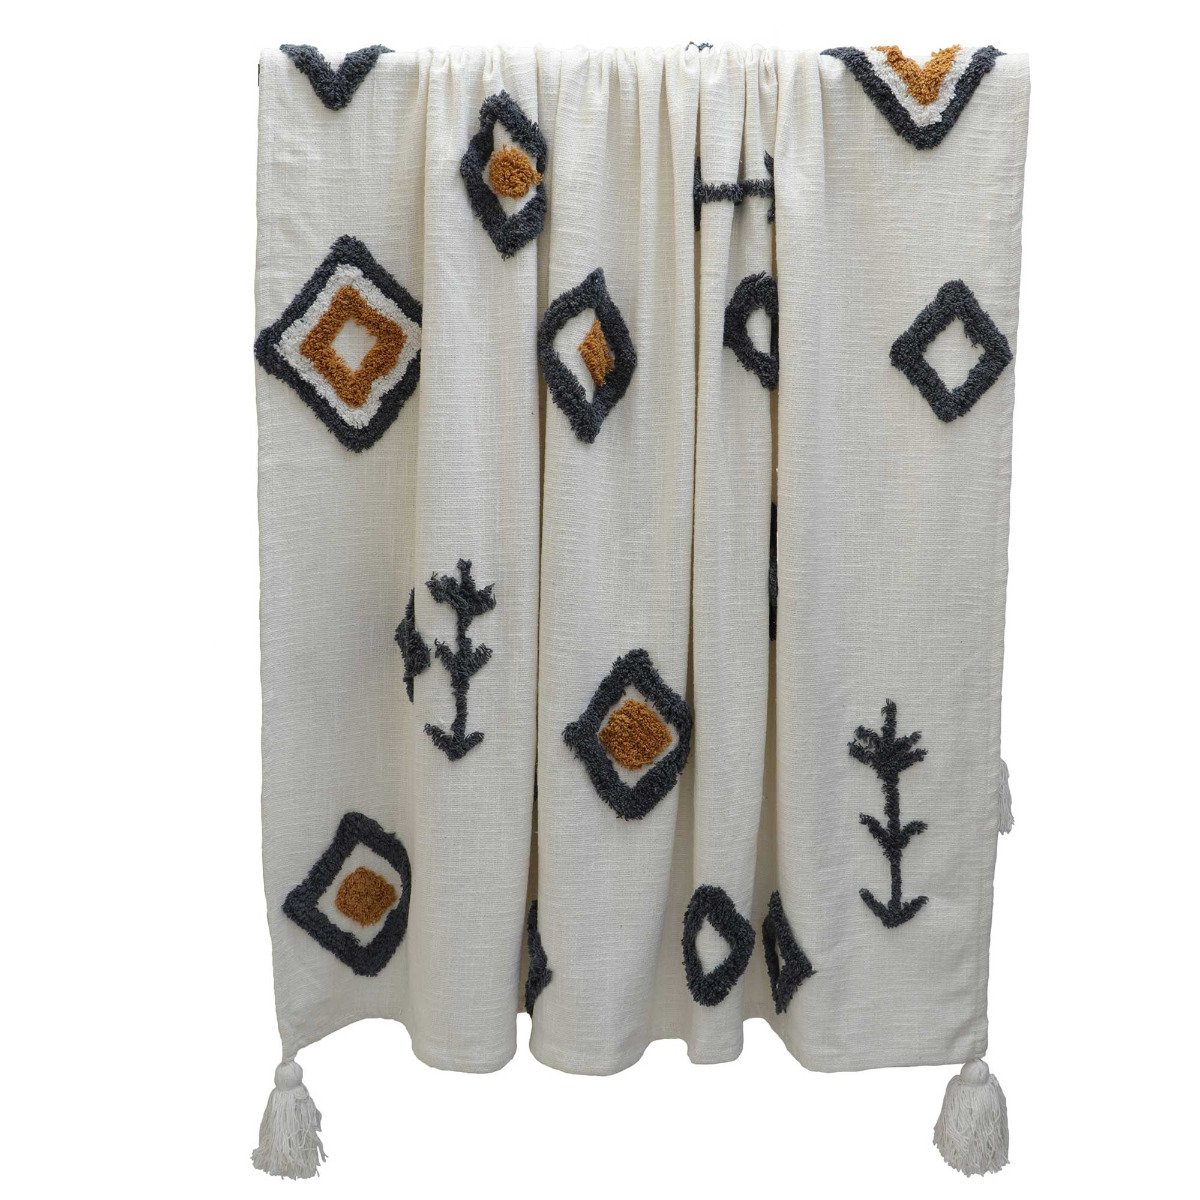 Patterned Throw Blanket, Neutral 100% Cotton | Barker & Stonehouse